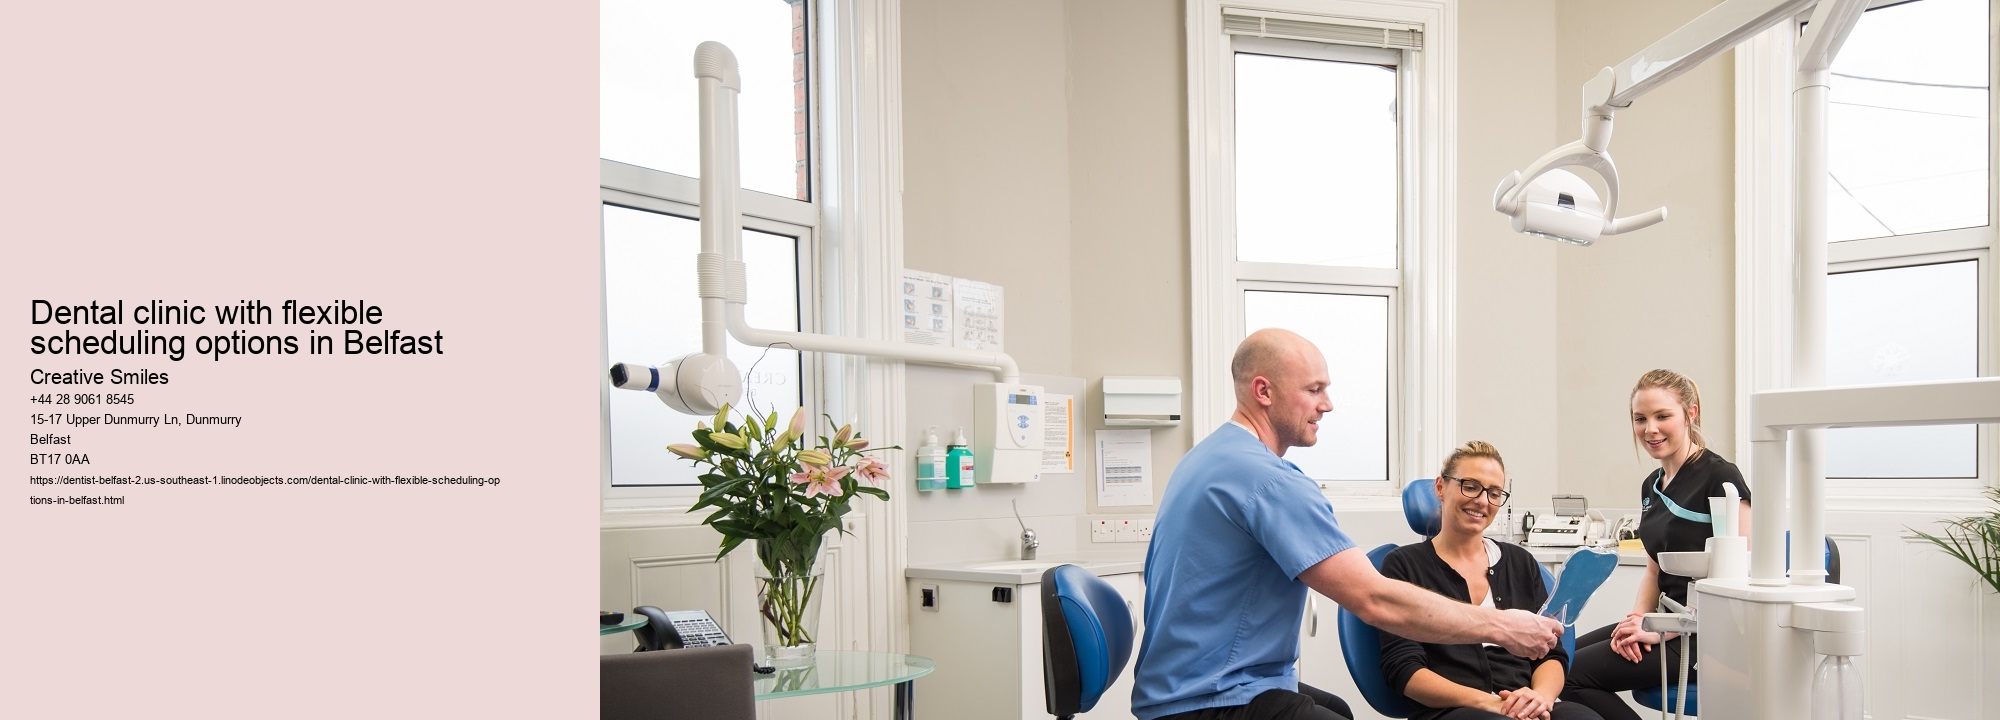 Dental clinic with flexible scheduling options in Belfast